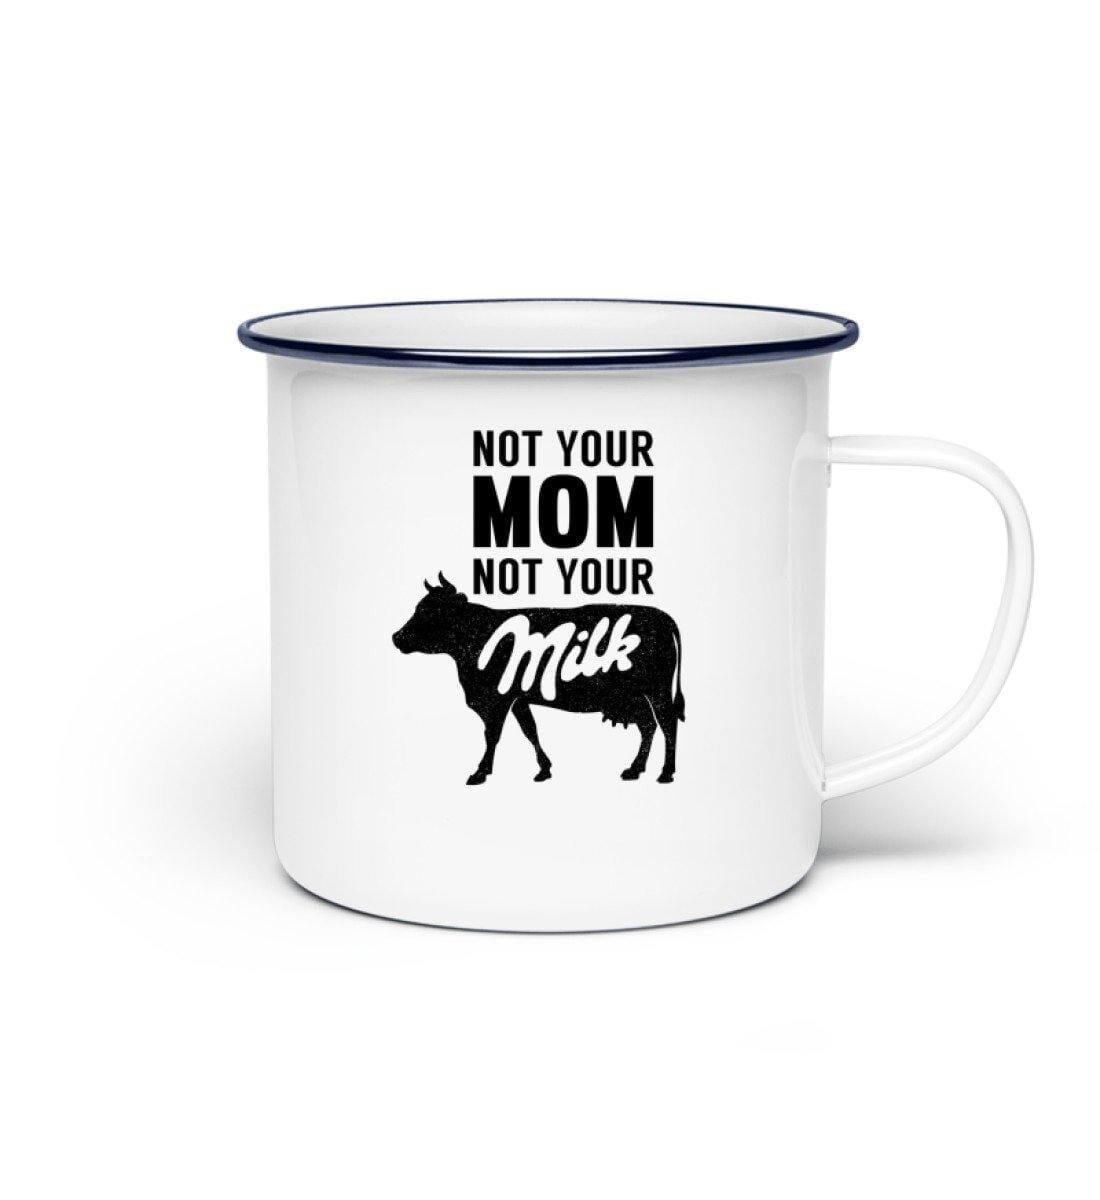 Not your mom not your milk - Emaille Tasse Emaille Tasse Shirtee White onesize 